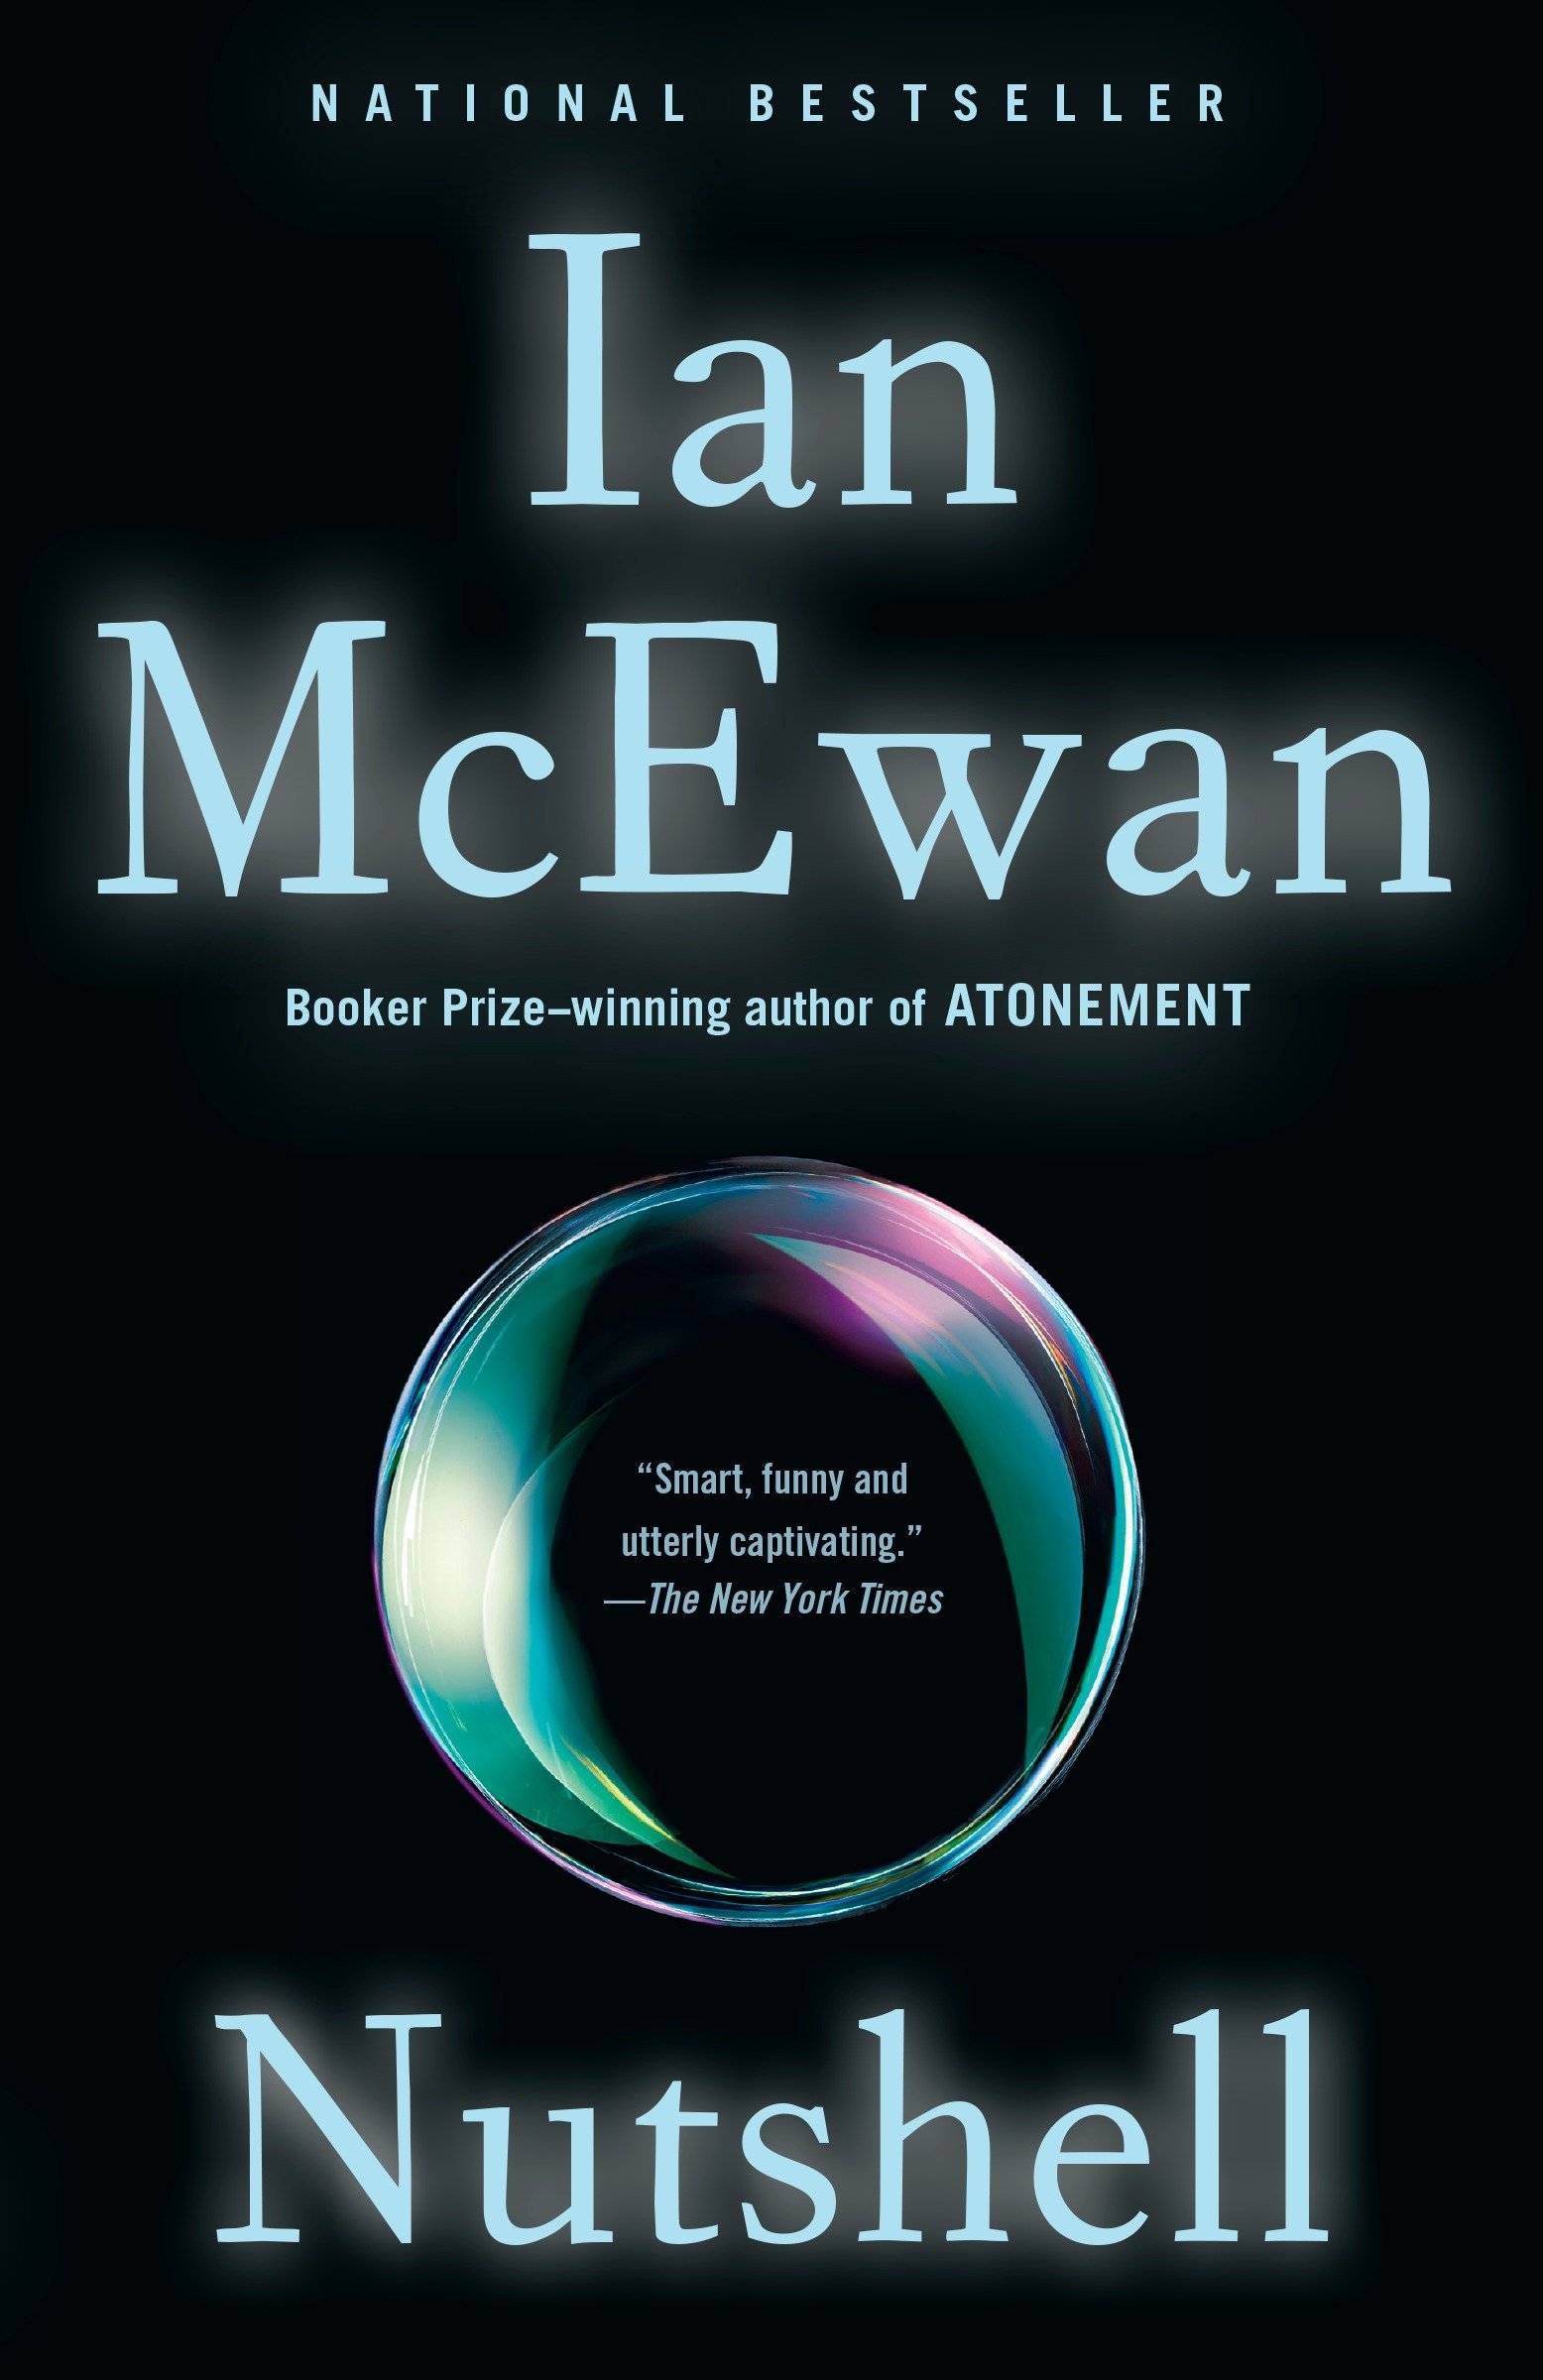 A captivating and thought-provoking cover of ian mcewan's novel "nutshell," featuring a mesmerizing iridescent bubble against a dark background, heralding the book's status as a national bestseller and showcasing praise from the new york times.